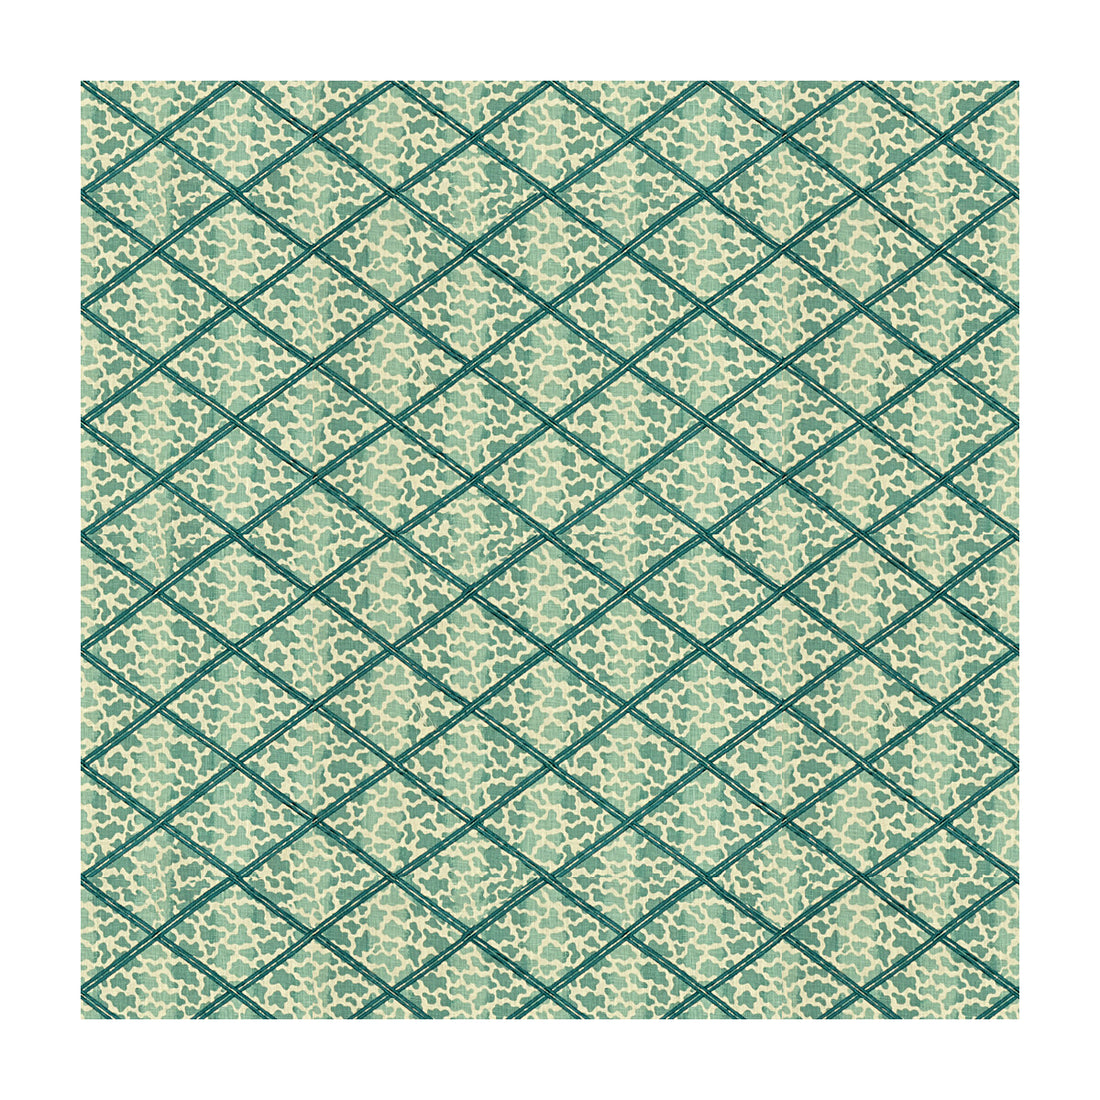 Jag Trellis fabric in turquoise color - pattern 2015131.13.0 - by Lee Jofa in the Parish-Hadley collection